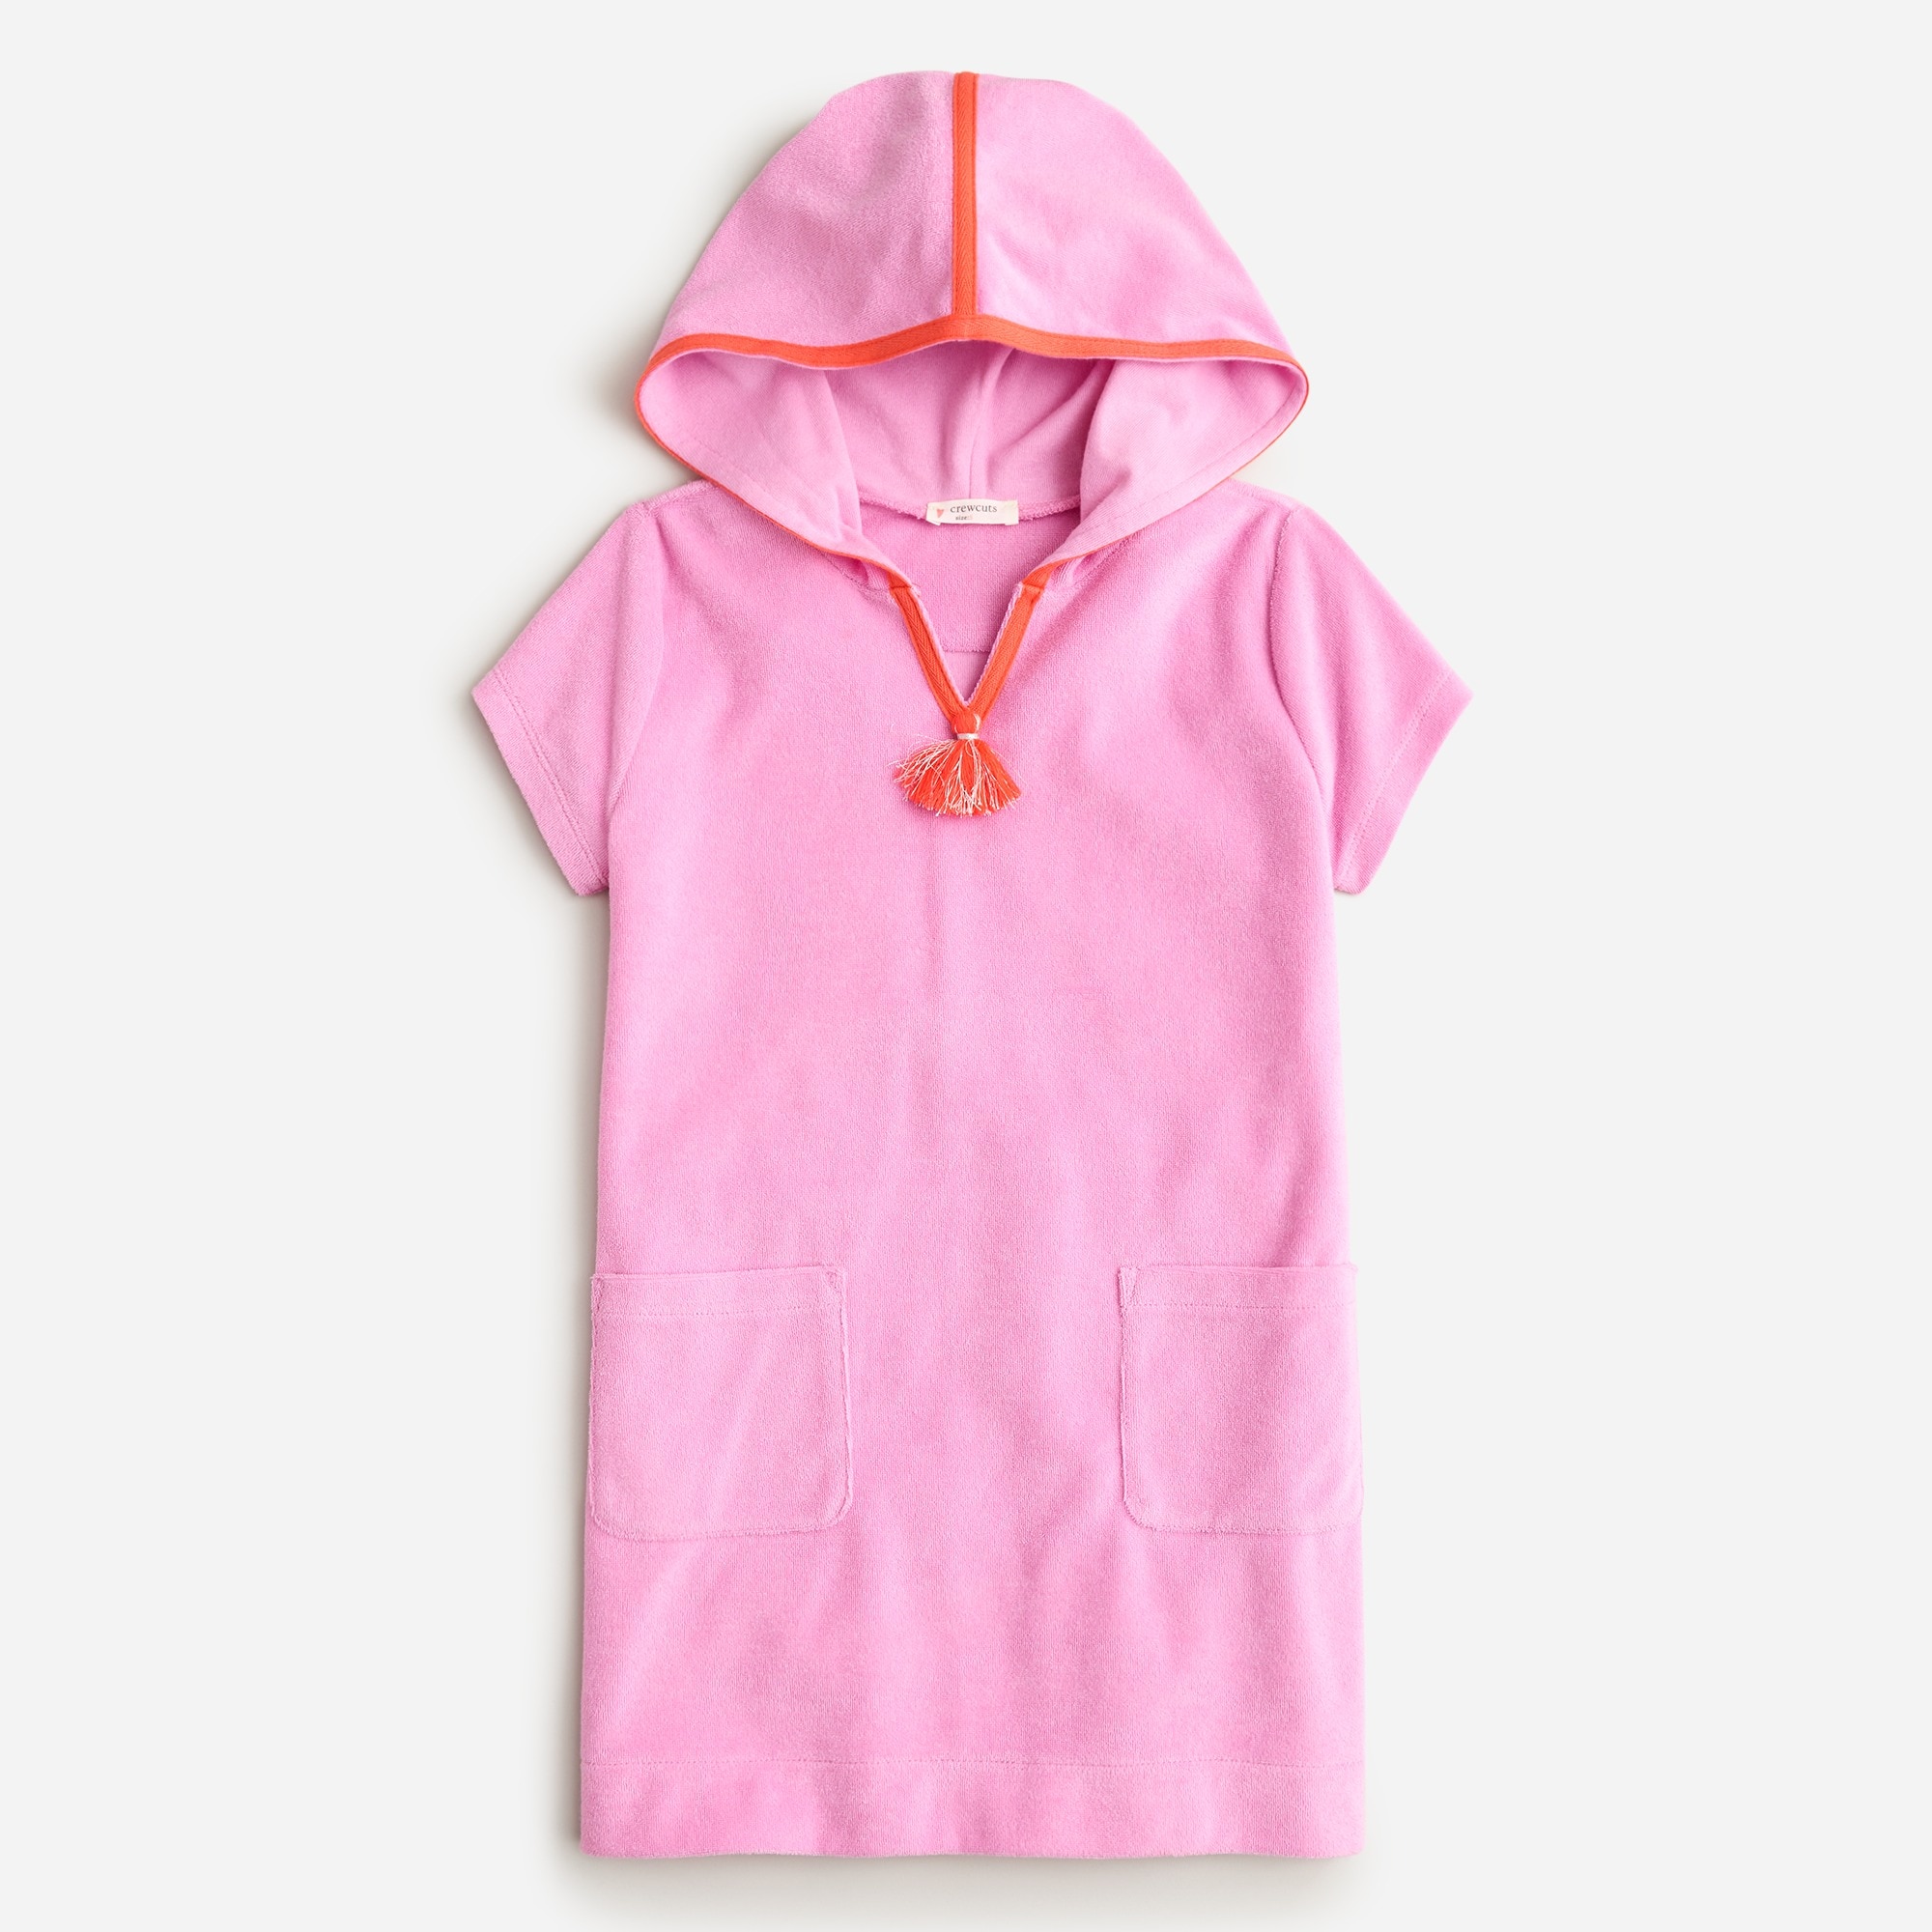 girls Girls' hooded tunic in towel terry